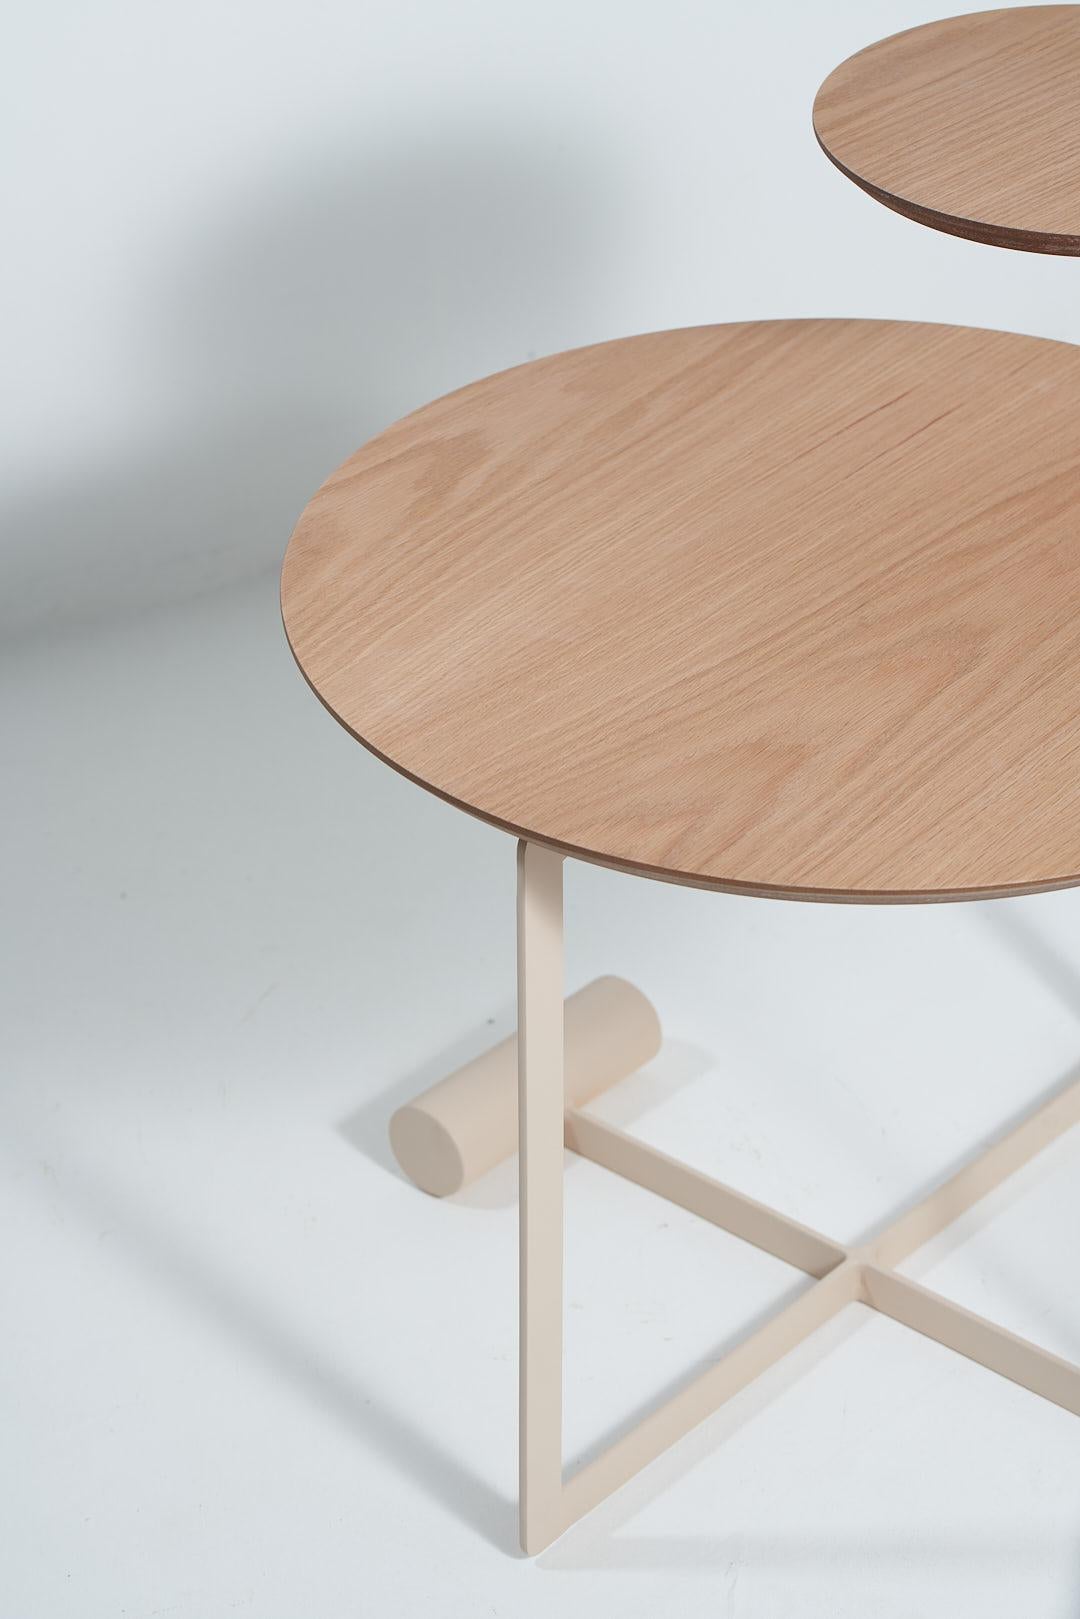 Sense Collection, Wood and Steel American Oak Side Table In New Condition For Sale In Santa Edwiges, MG